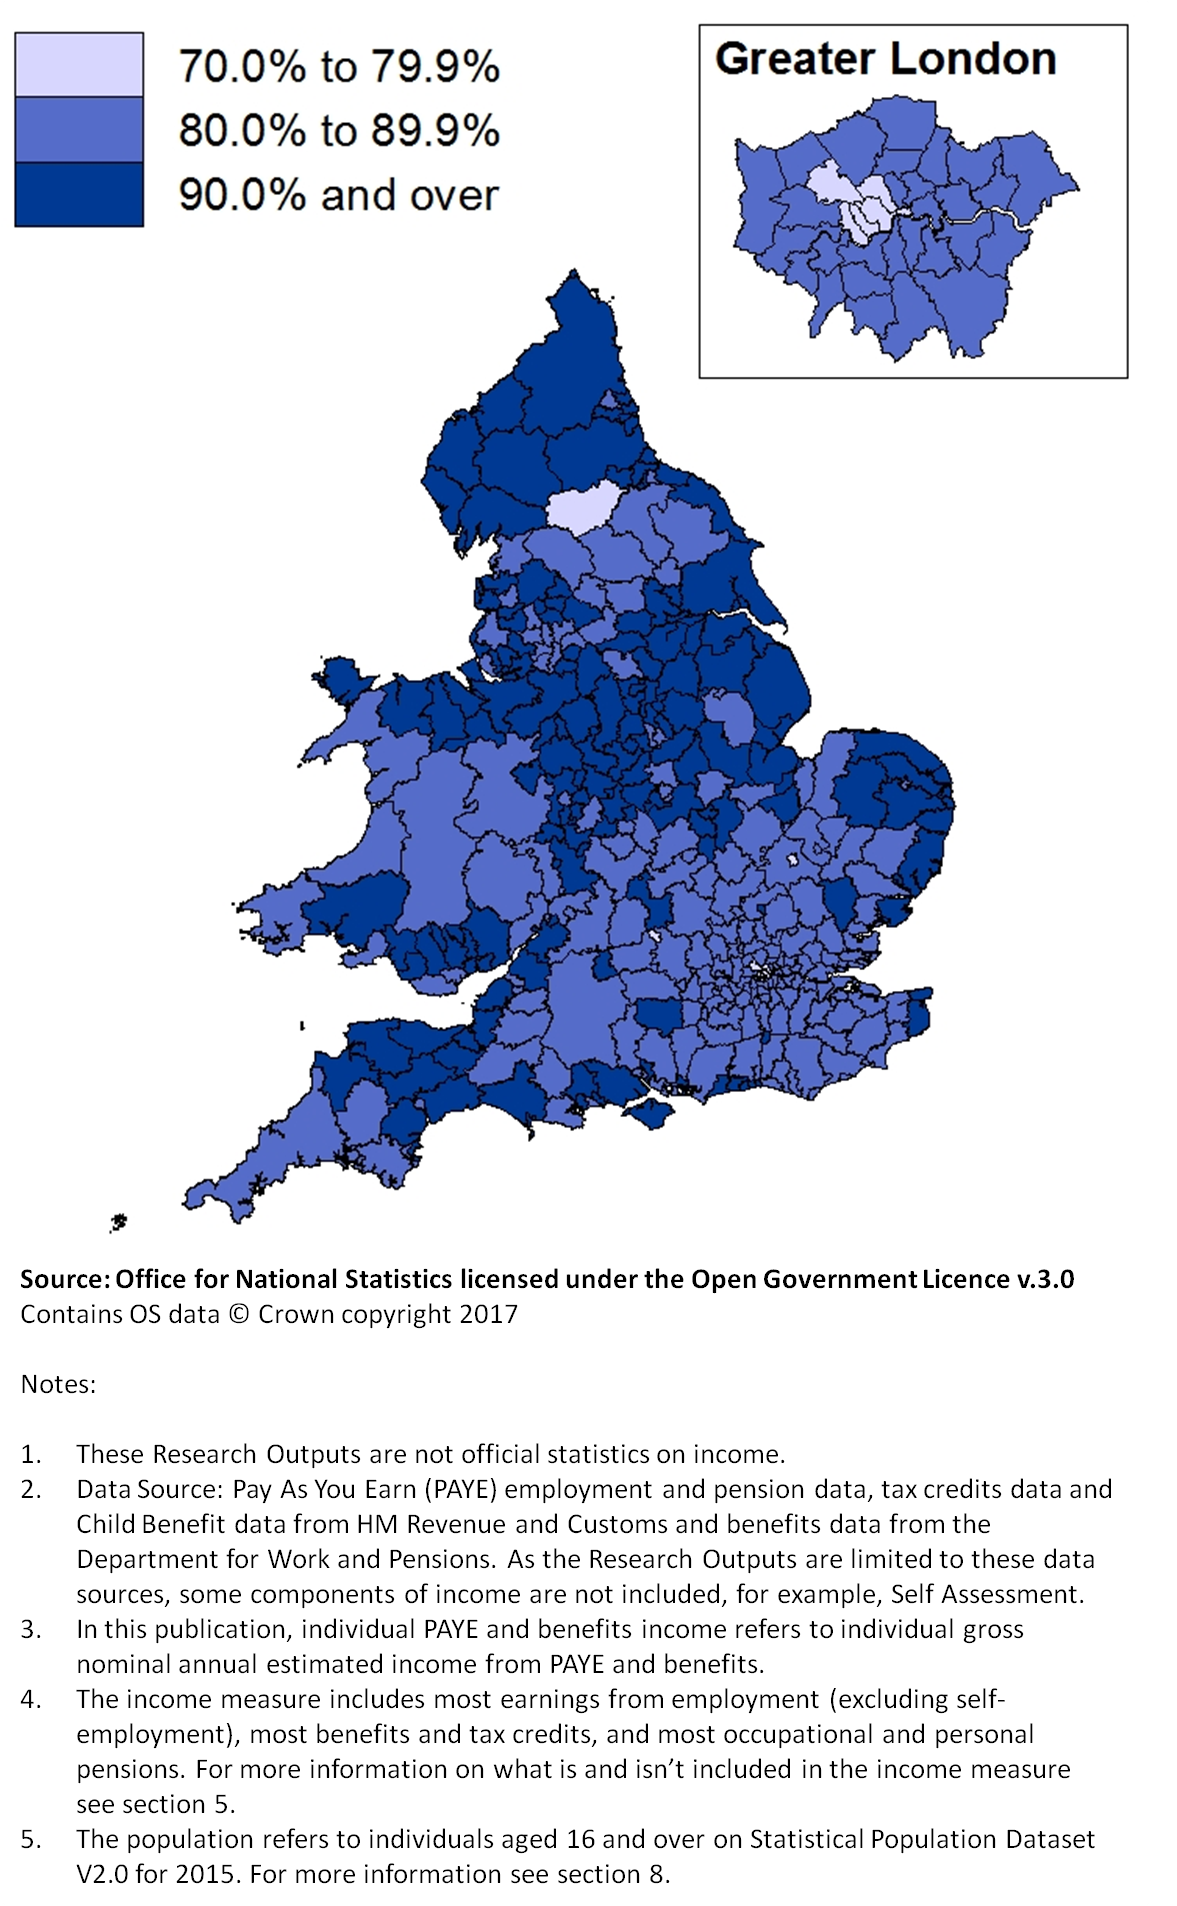 All local authorities had some income information available for at least 70% of their population.